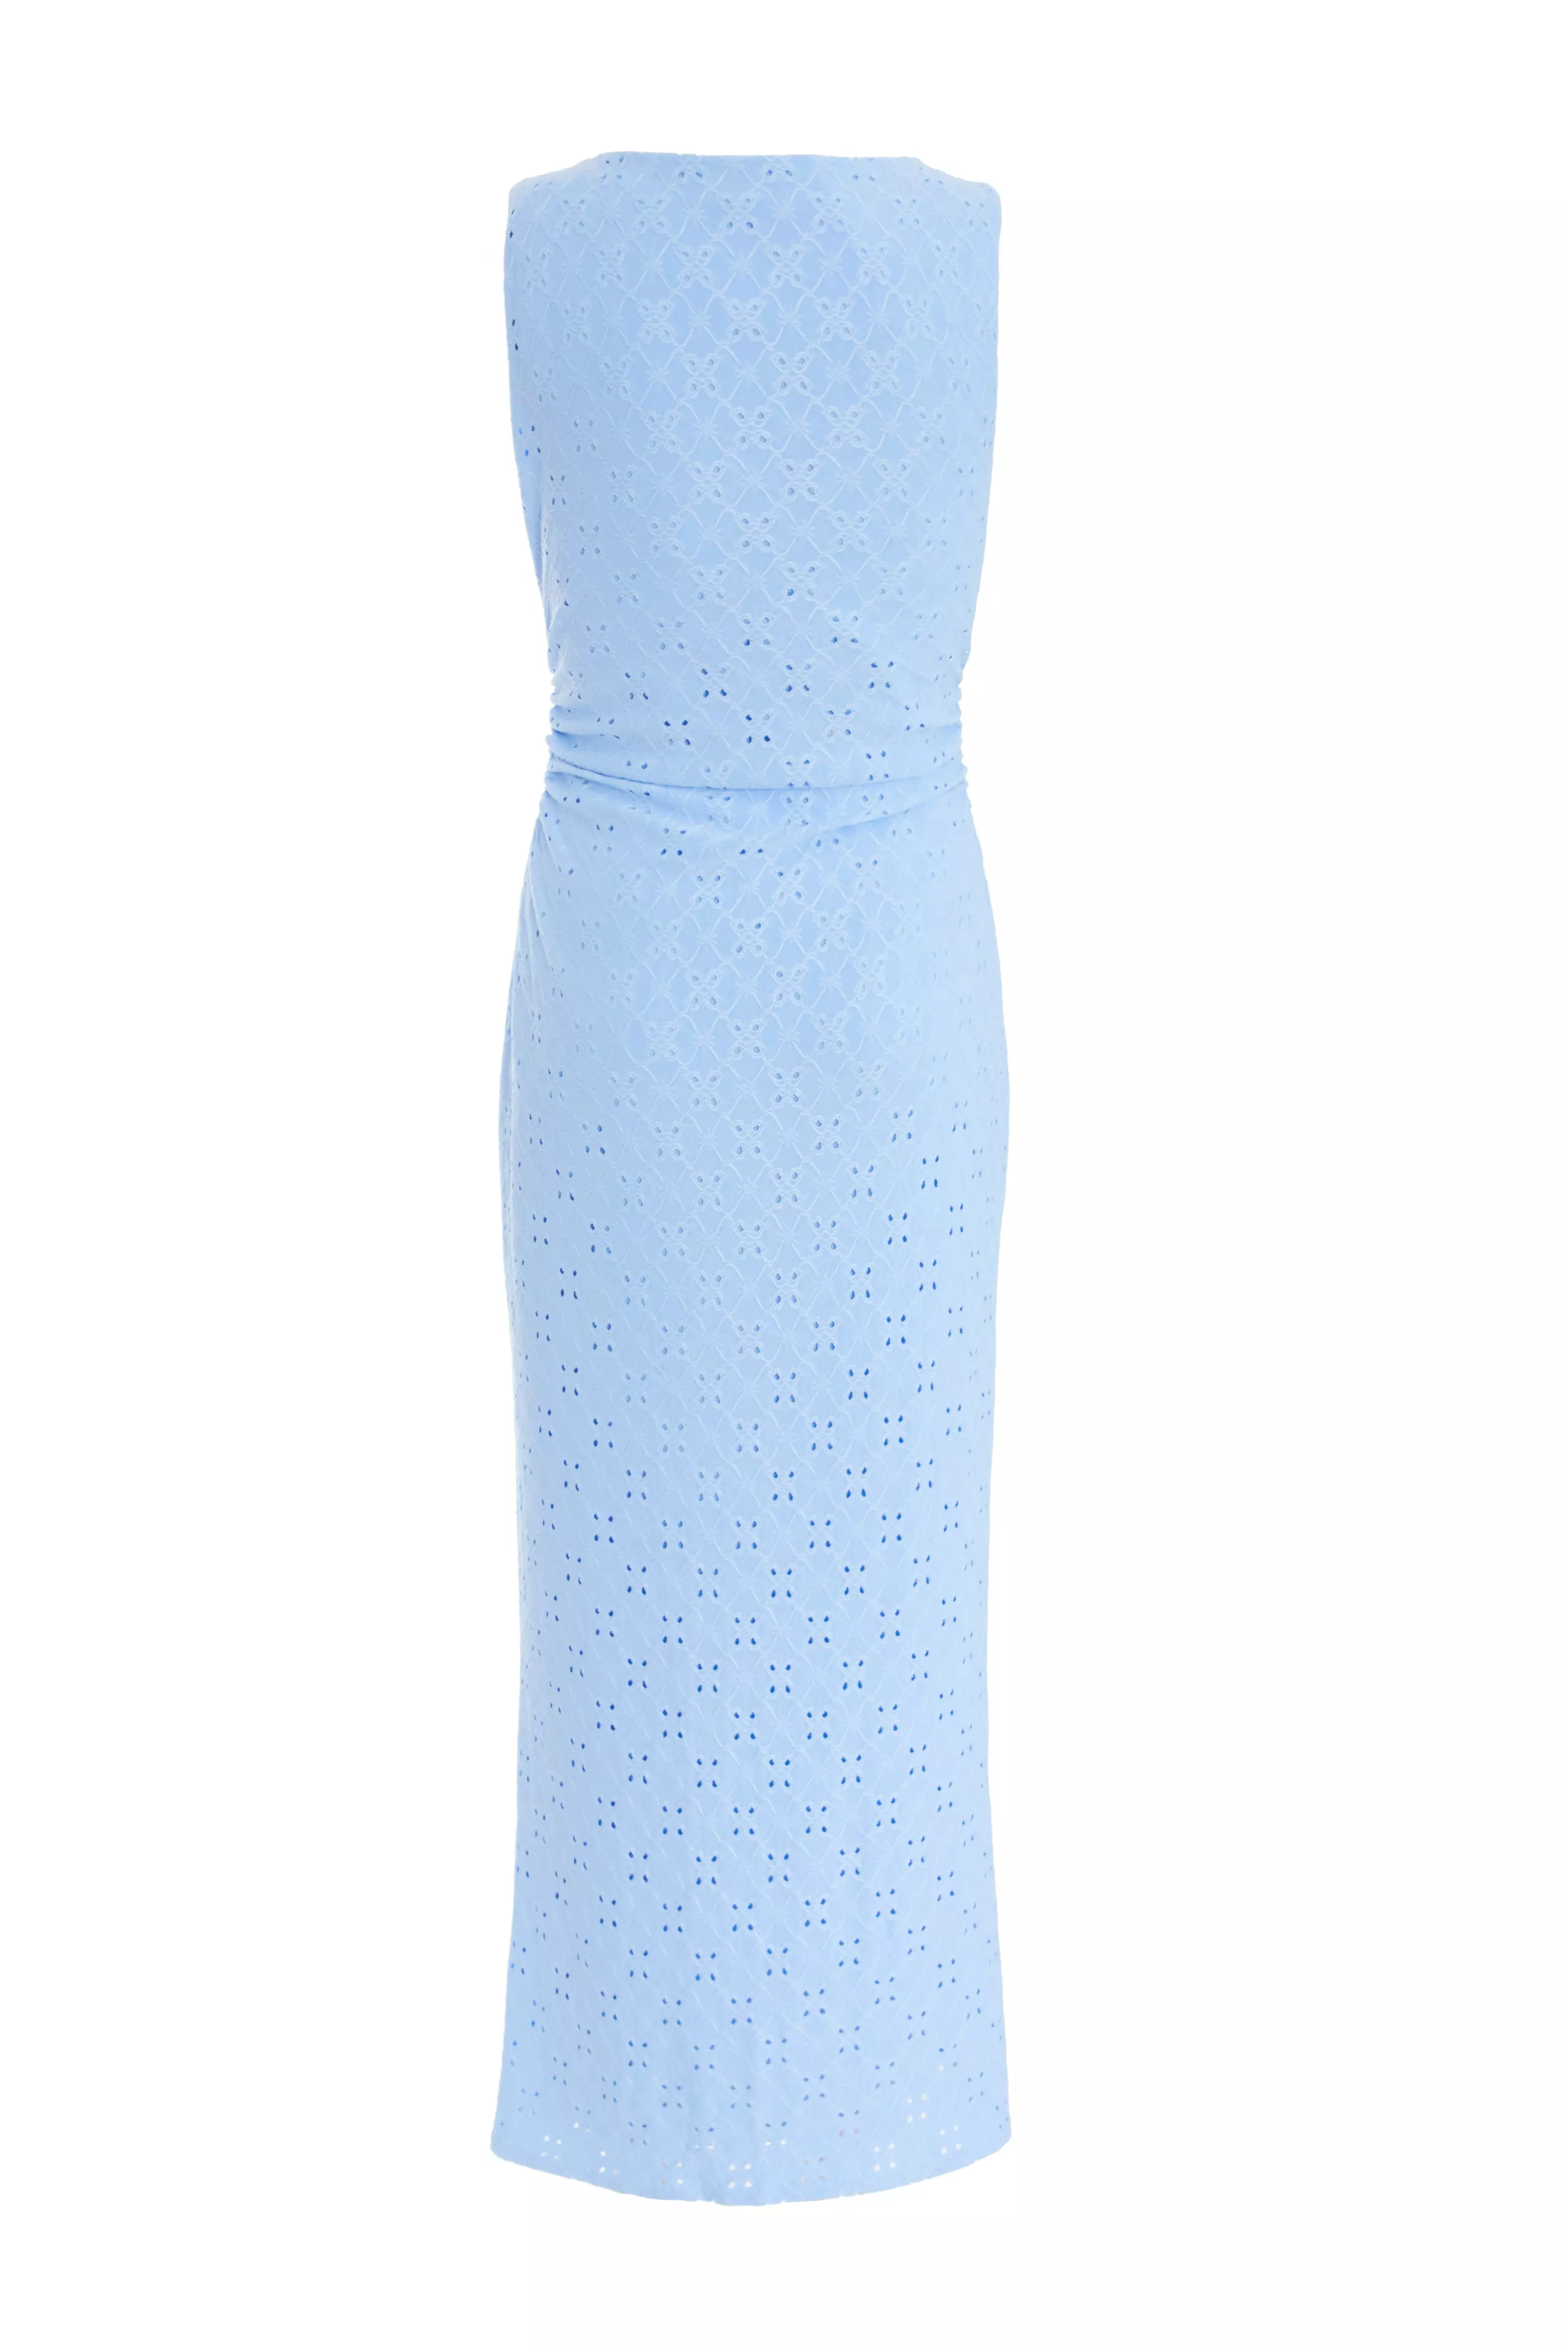 Blue Embroidered Bodycon Midaxi Dress